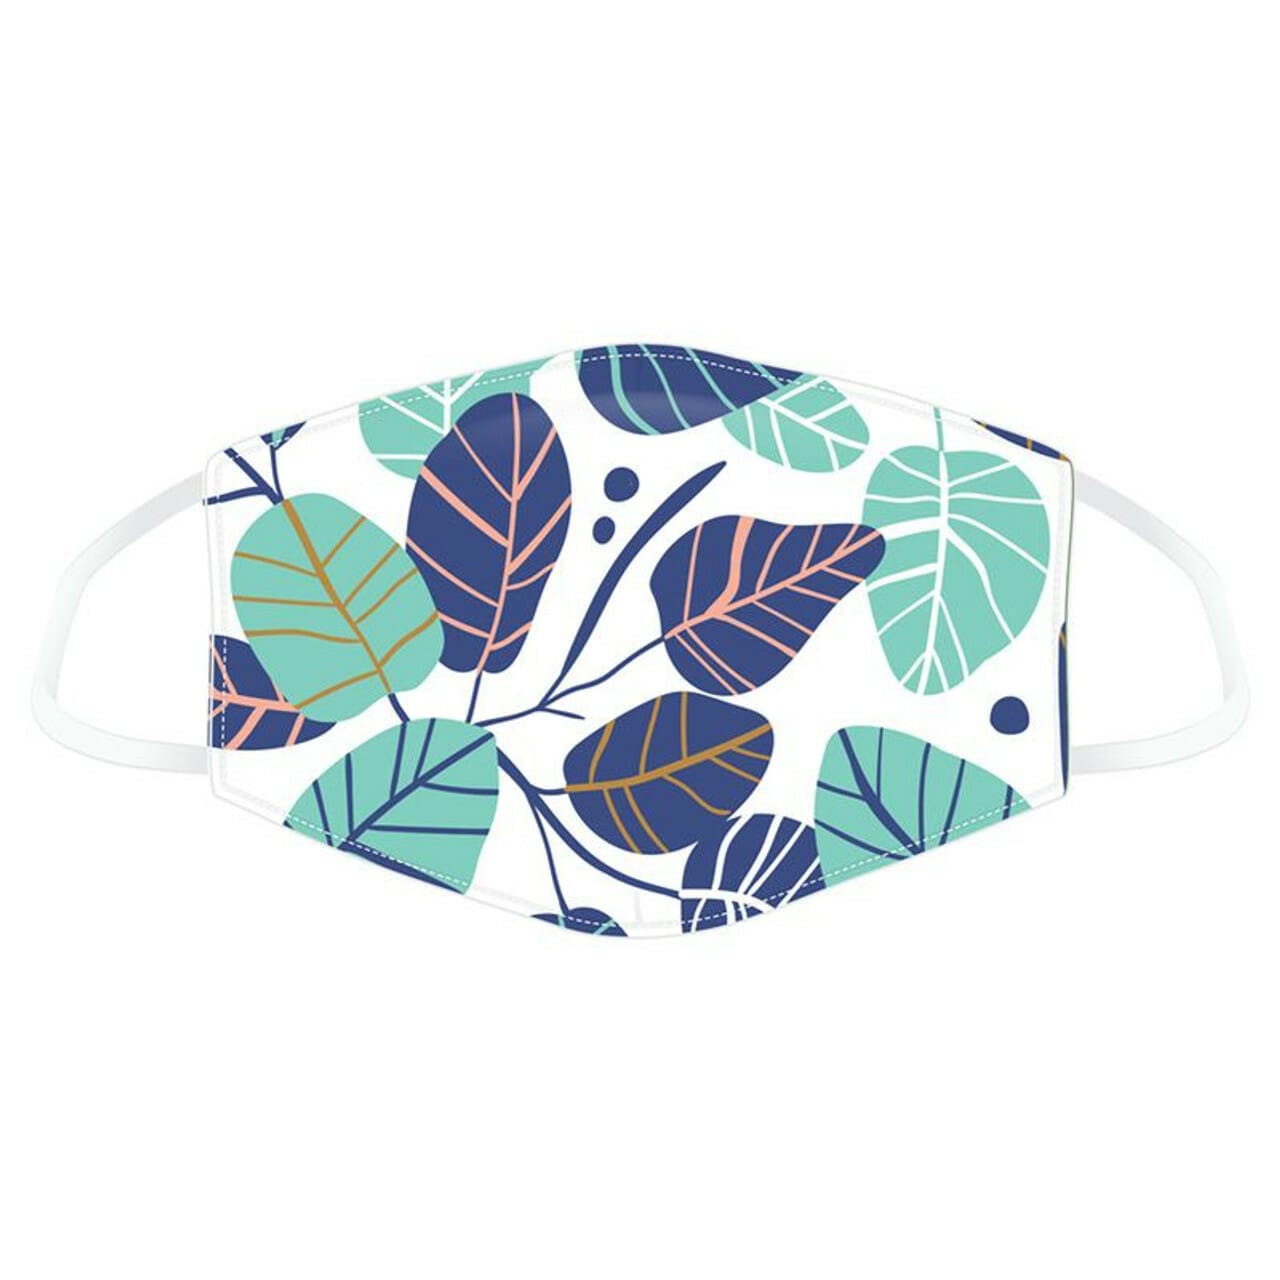 Cancer Patient and Visitor Face Mask Covering - Simple Leaves Design (Adult Size)